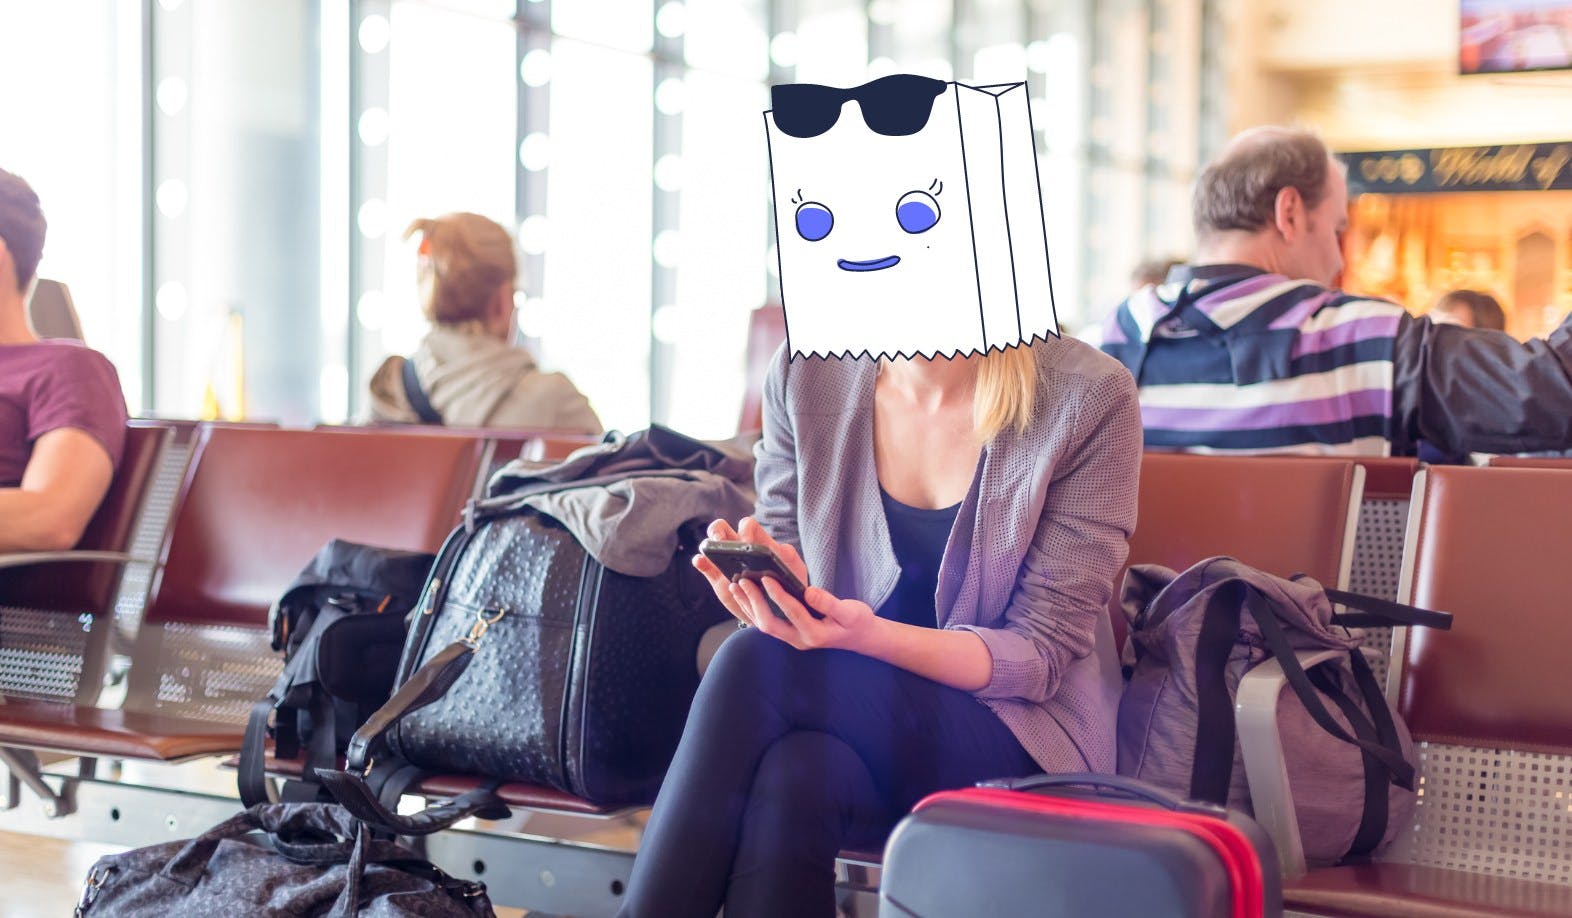 Blog Post Image 'How to Use Email Aliases to Protect Your Privacy'. We see a woman sitting in an airport waiting area. She is browsing on her phone and has an illustrated  bag over her head, to indicate that her privacy is protected.